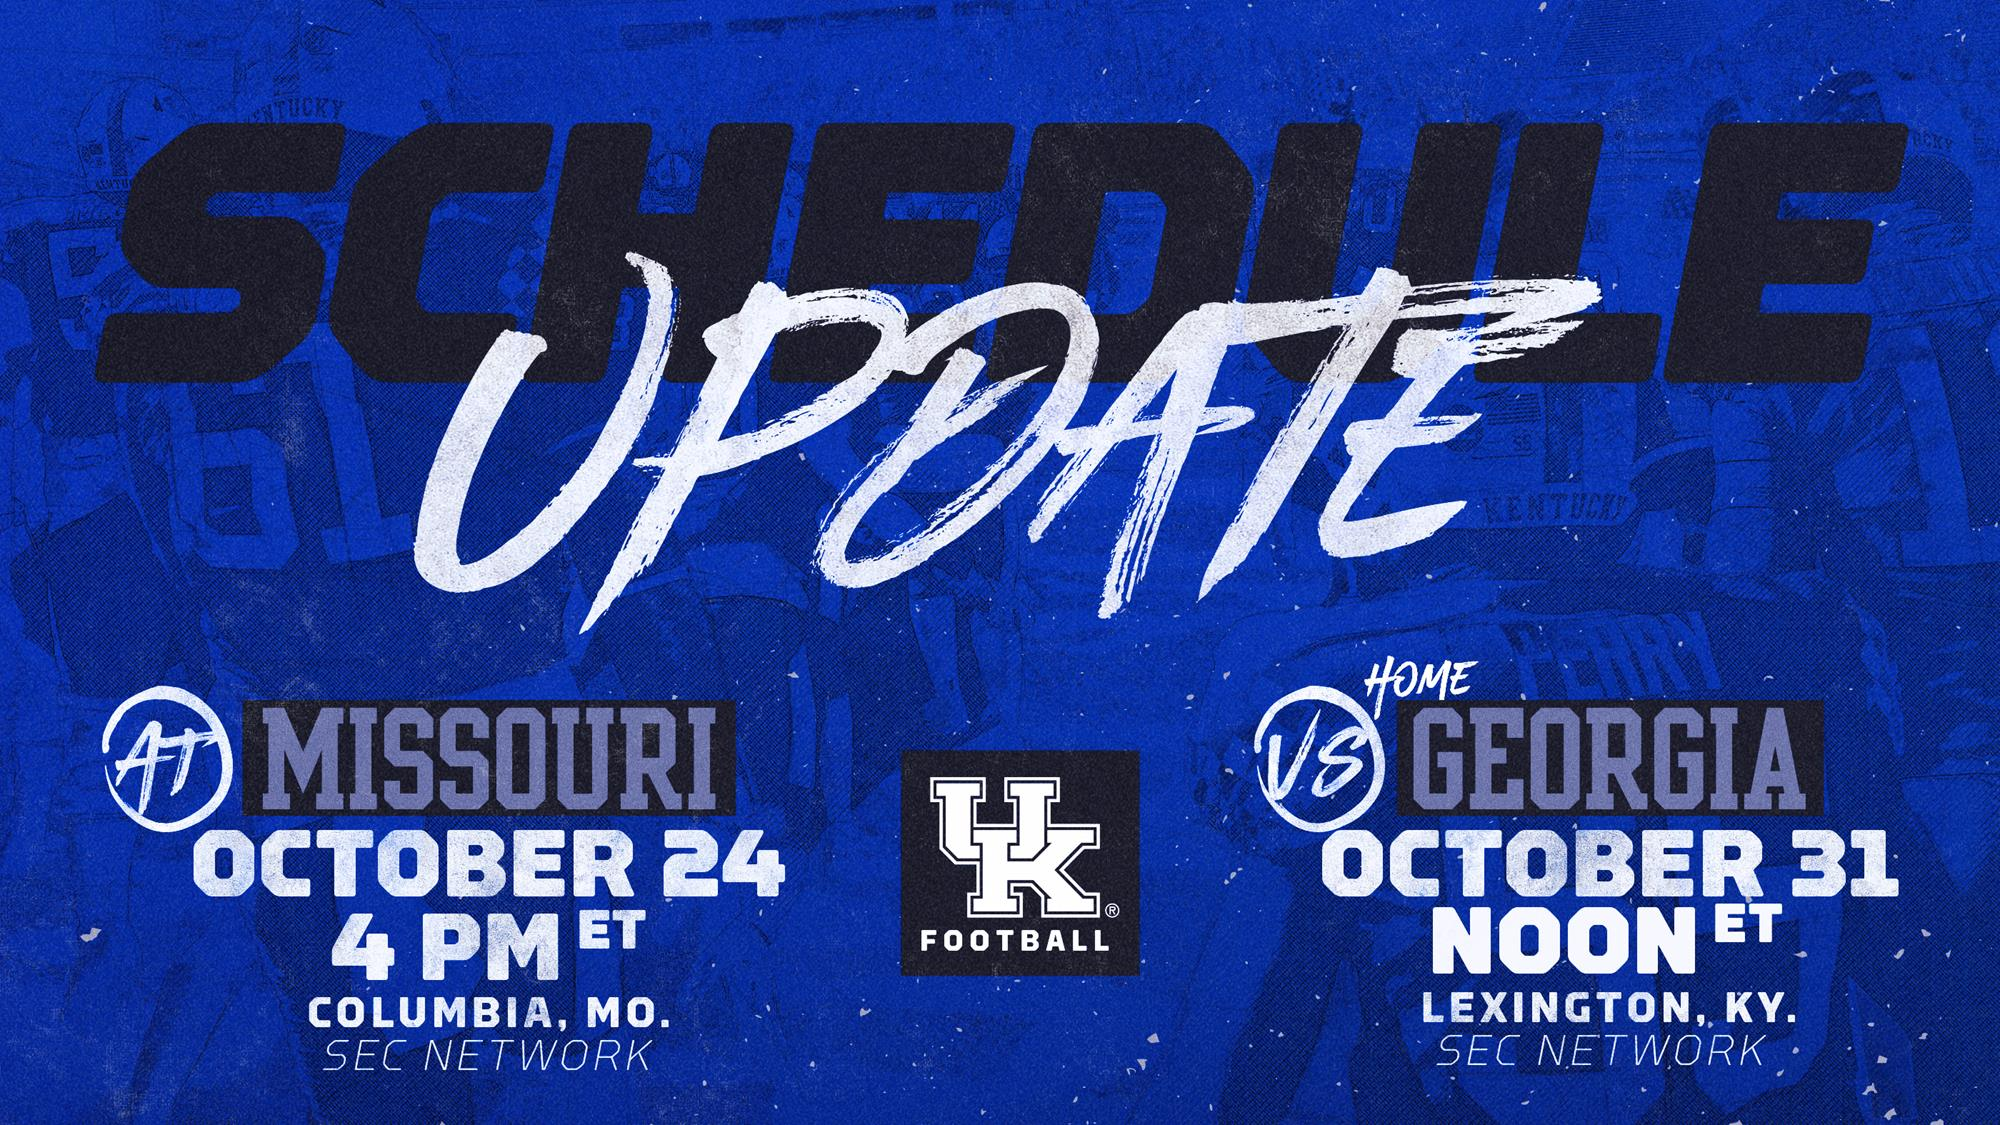 SEC Announces Changes to Kentucky Football Schedule